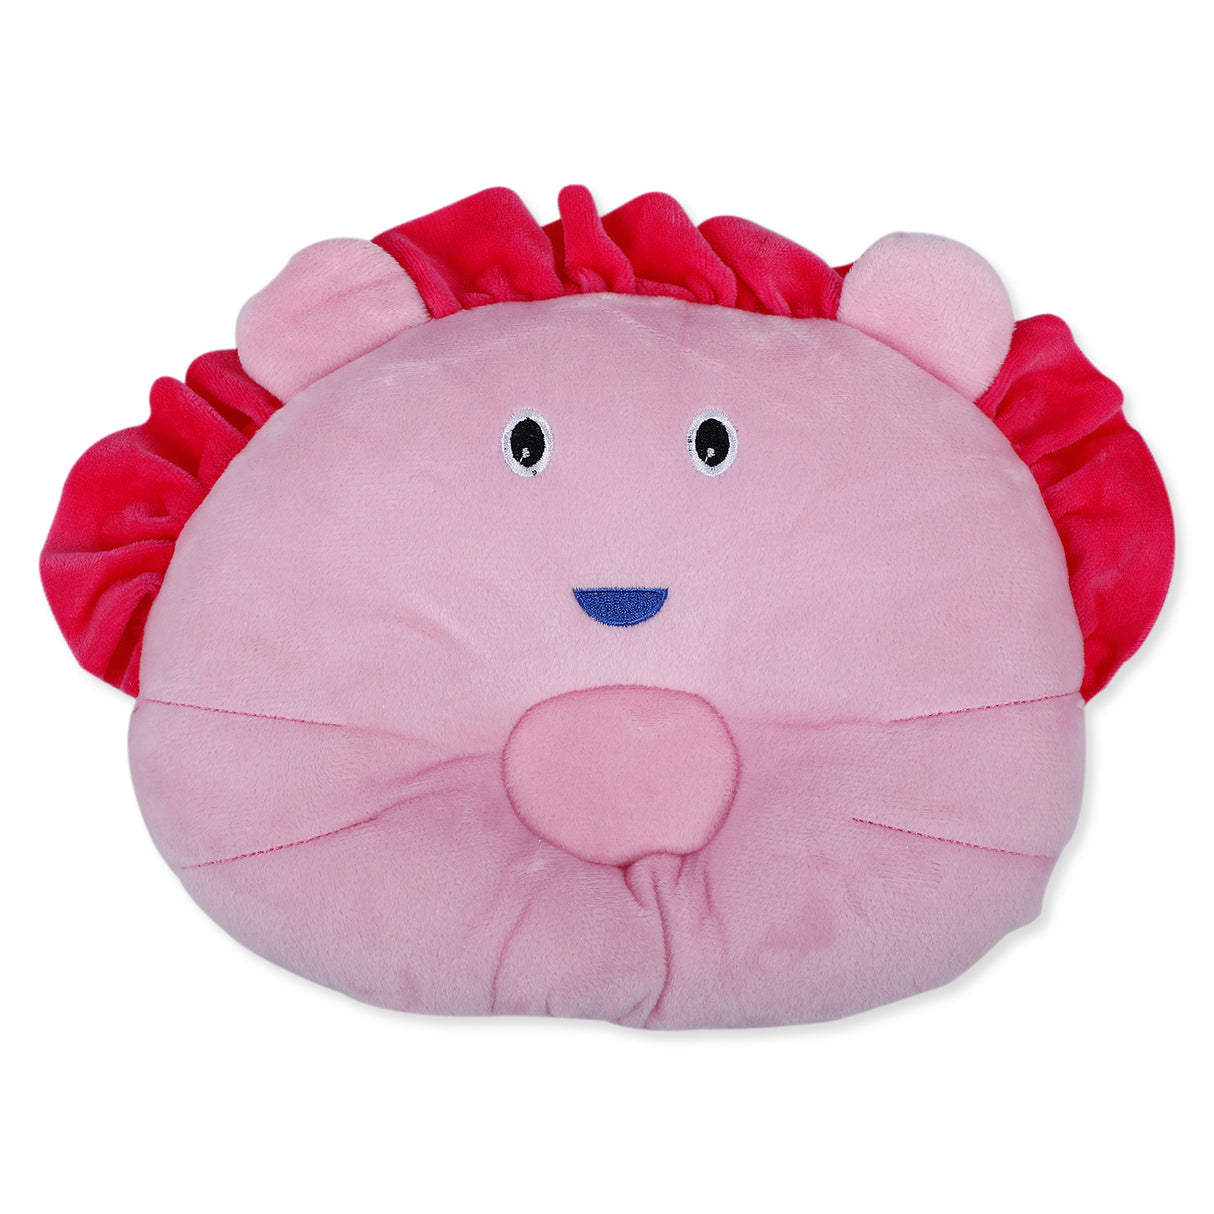 Lion Playful Soft And Cozy Pillow